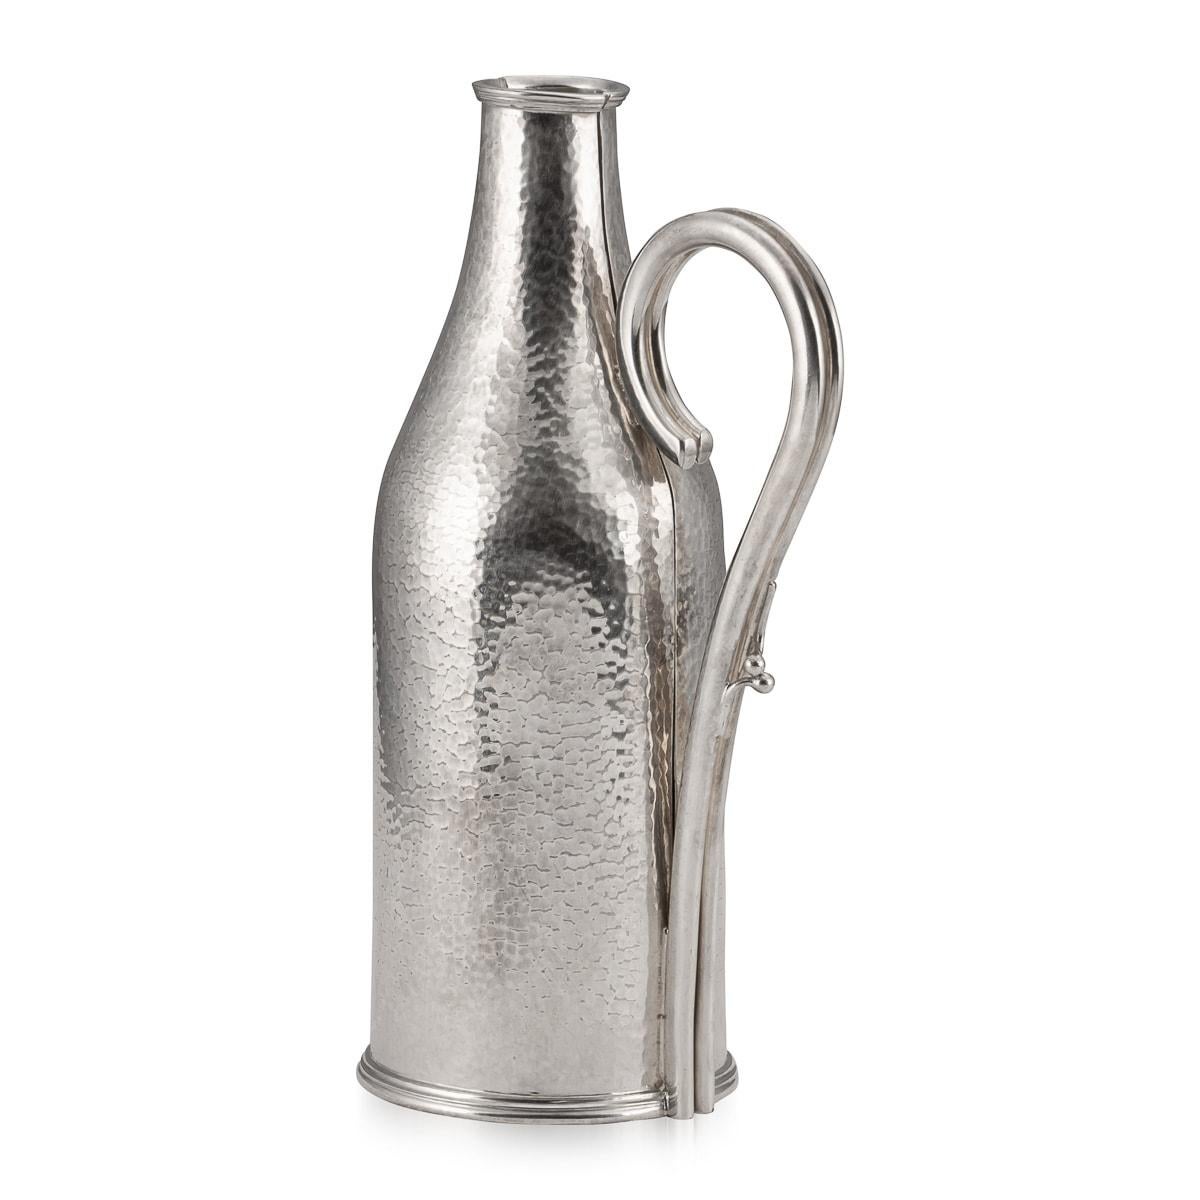 A lovely wine bottle holder in silver plate, made in the first half of the 20th century in England and retailed by the famous jeweller Mappin and Webb. It is made to house a bittle in the shape of the modern Champagne or Prosecco with the narrow